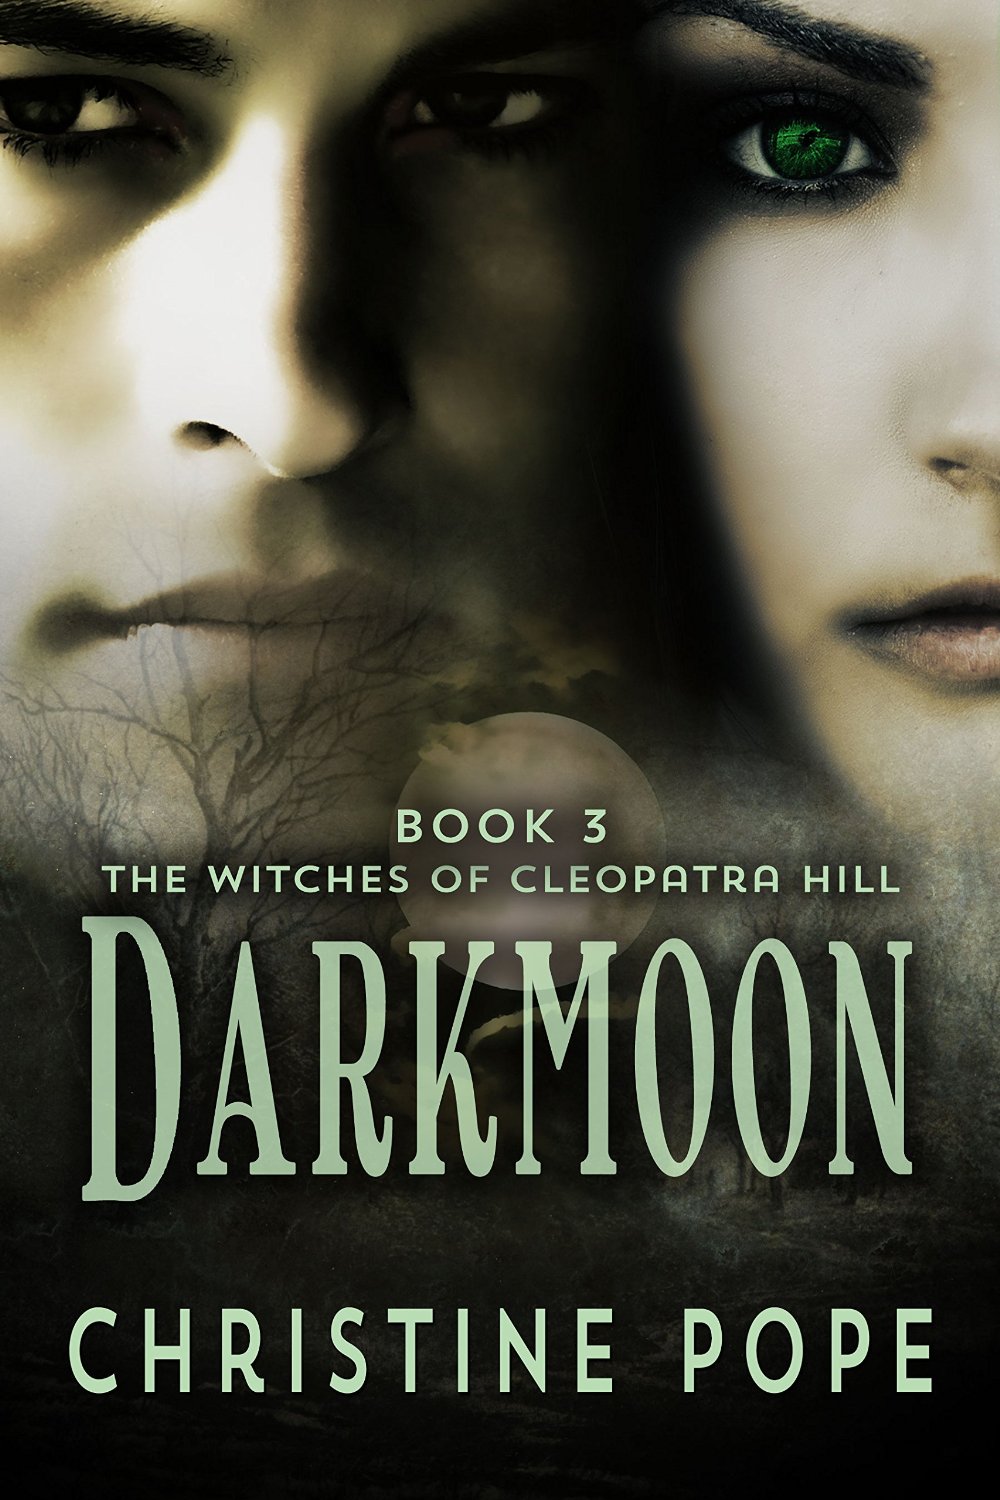 Darkmoon (The Witches of Cleopatra Hill Book 3) by Christine Pope